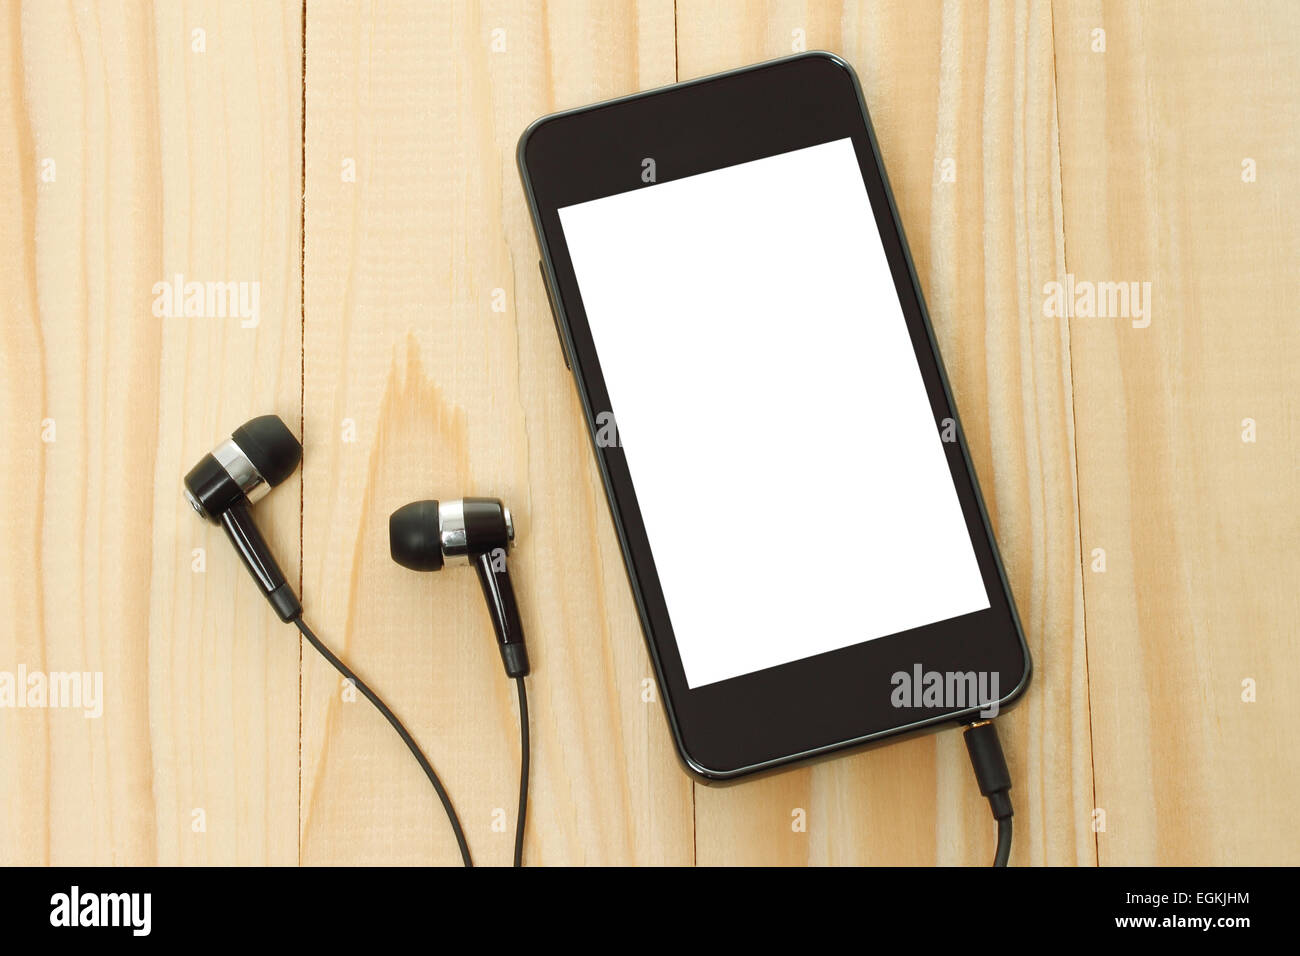 Smart phone with headphones on wooden background Stock Photo